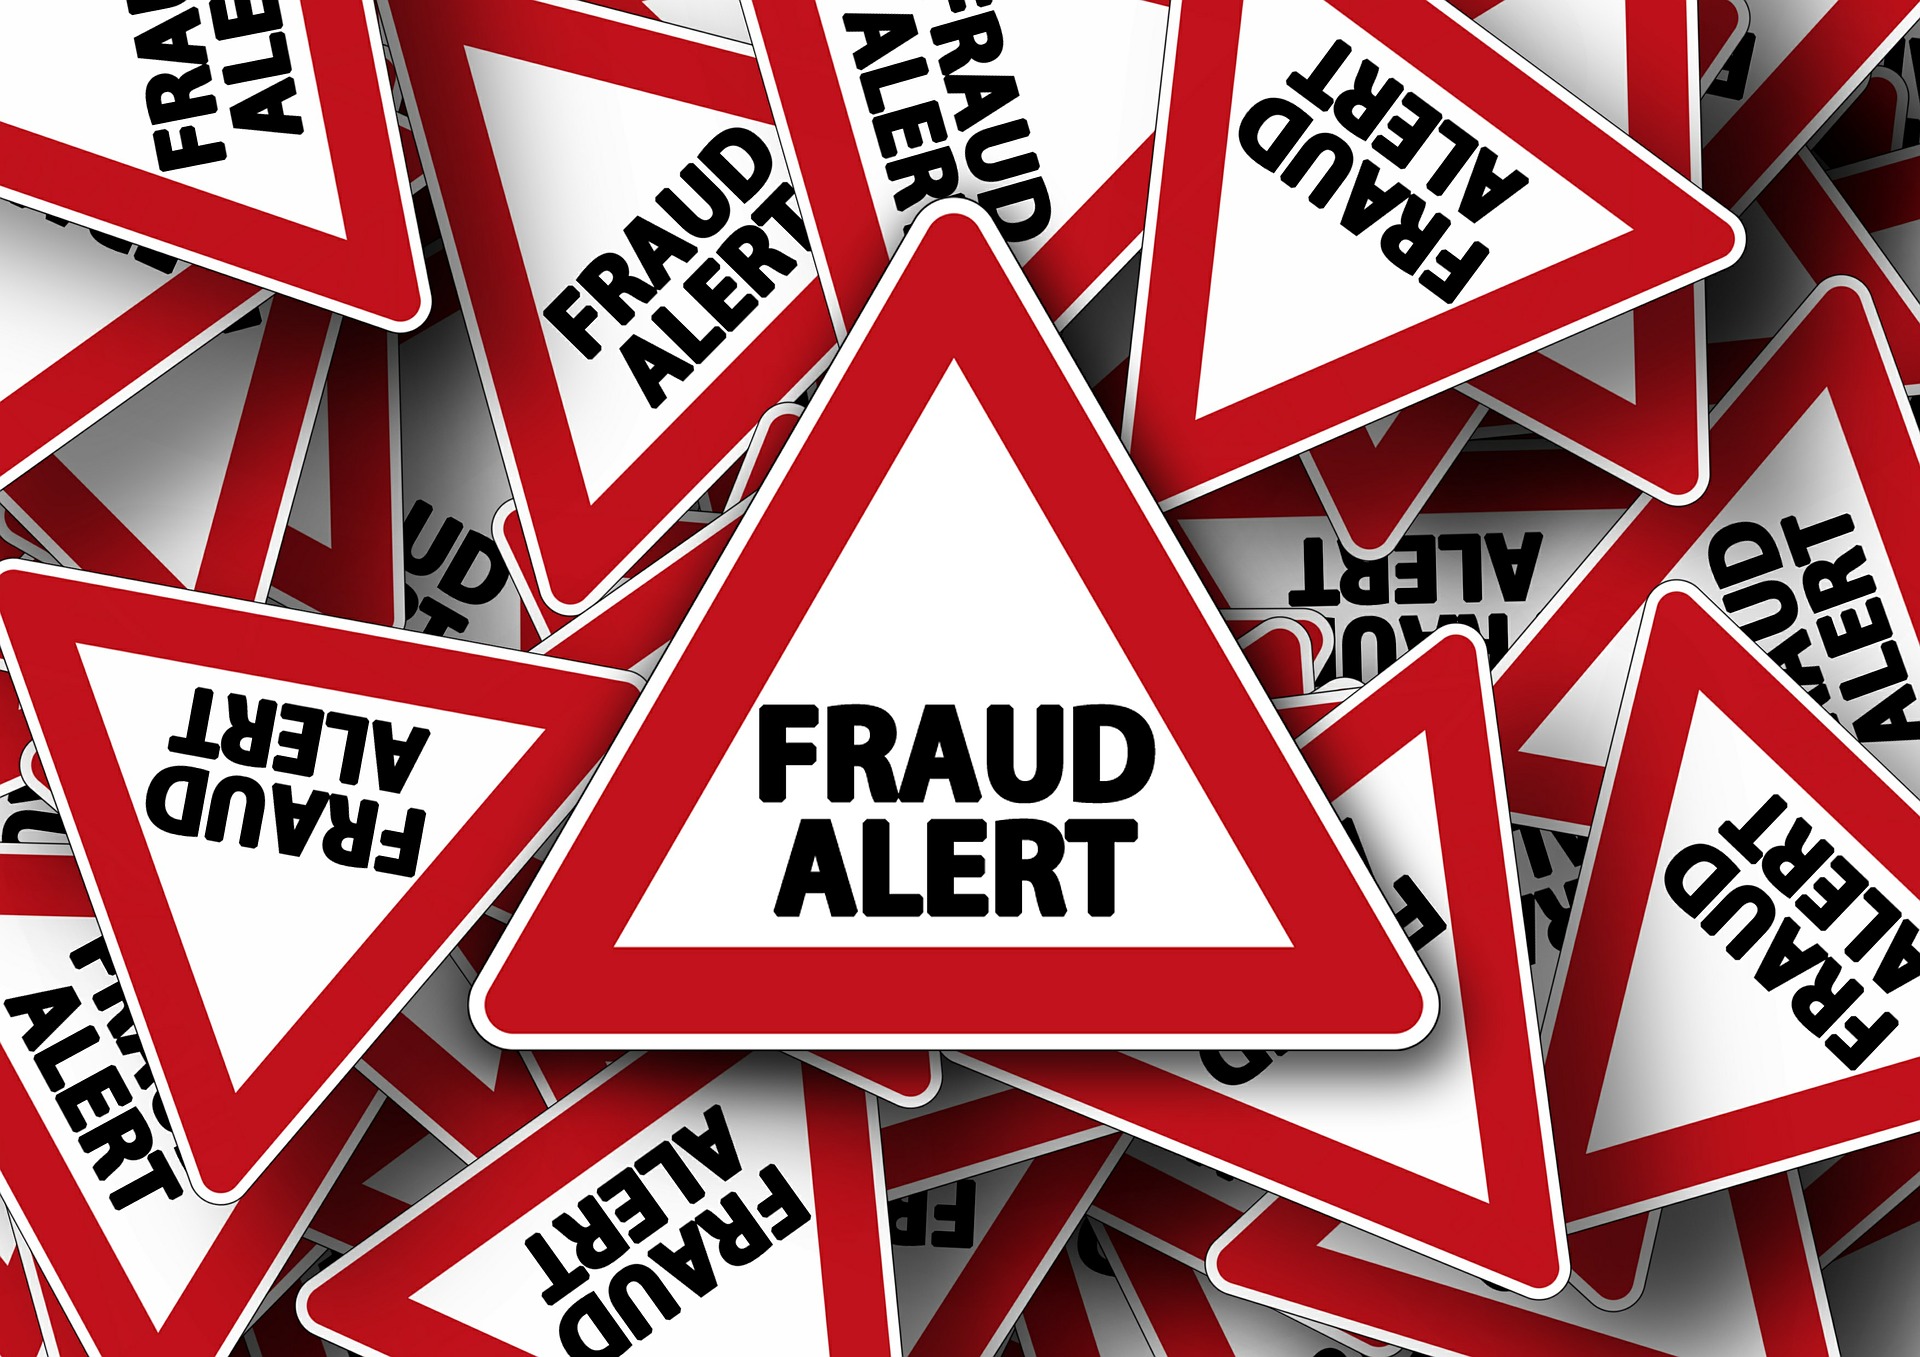 How should HMRC treat the victims of tax fraud?